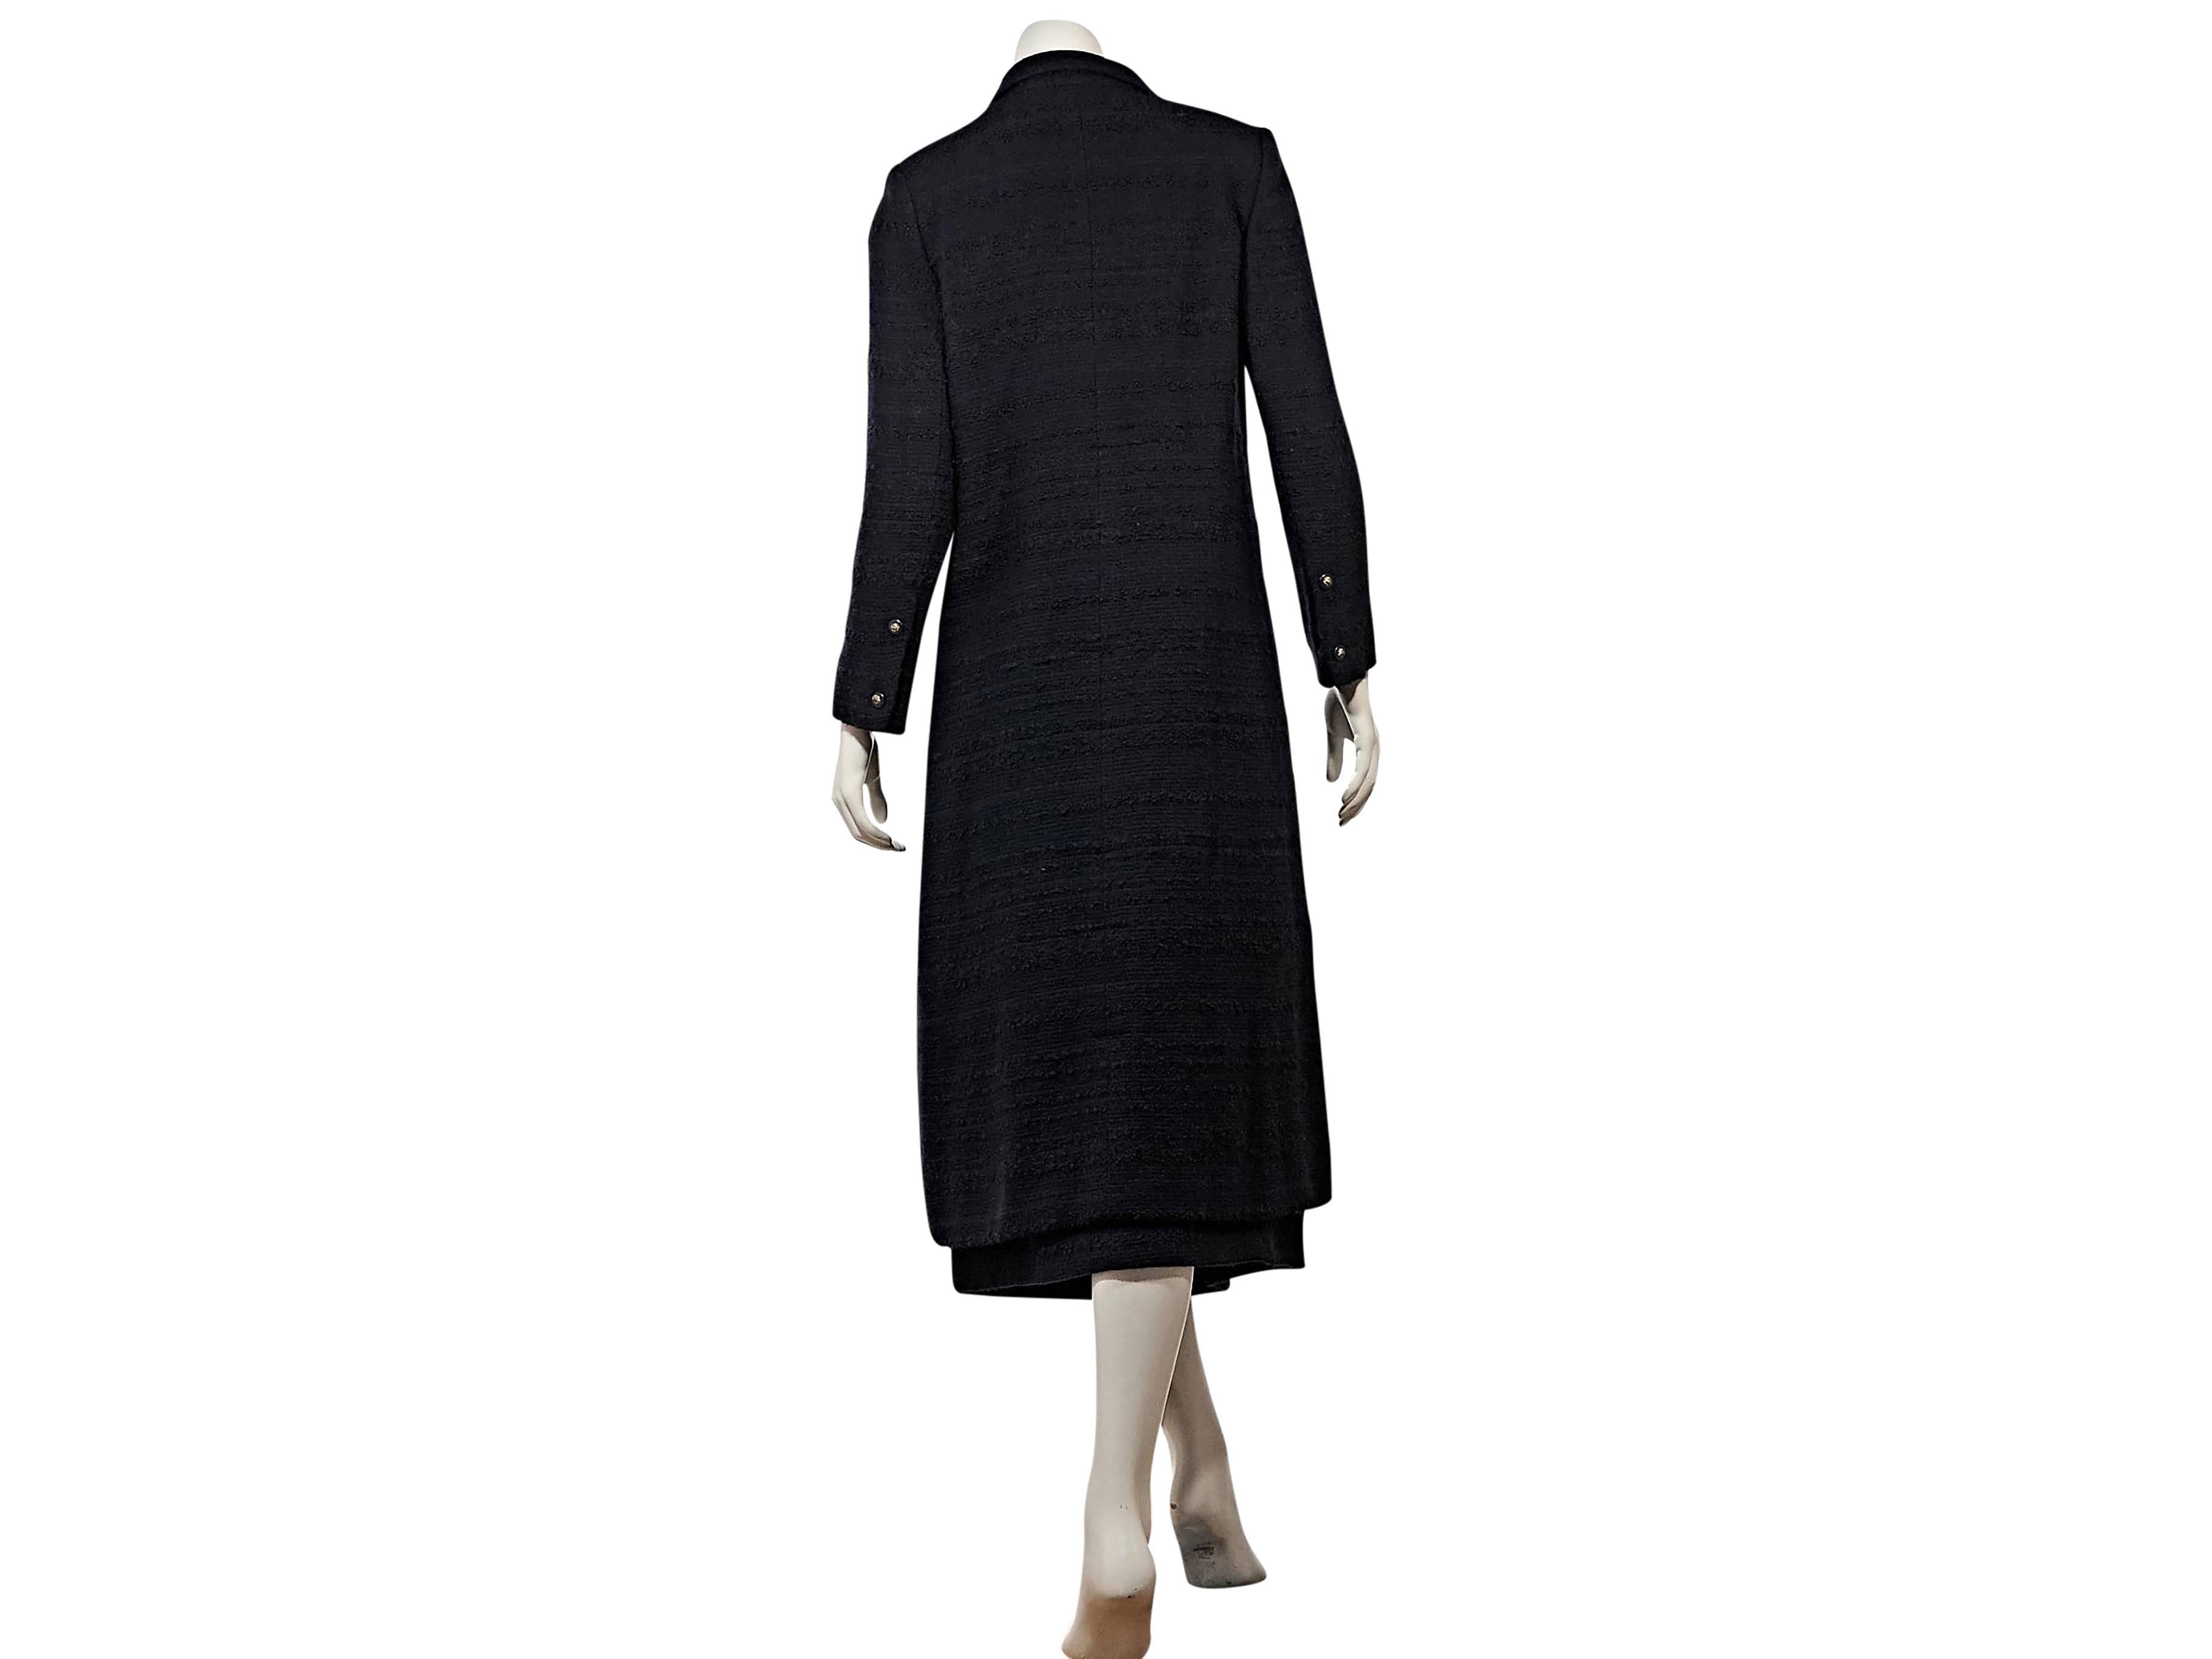 Product details: Vintage navy 2-piece skirt set by Chanel. Long jacket. Spread collar. Long sleeves. Double button detail at cuffs. Button-front closure. Four button besom pockets. Matching long skirt. Banded waist. Side slant pockets. 
Condition: